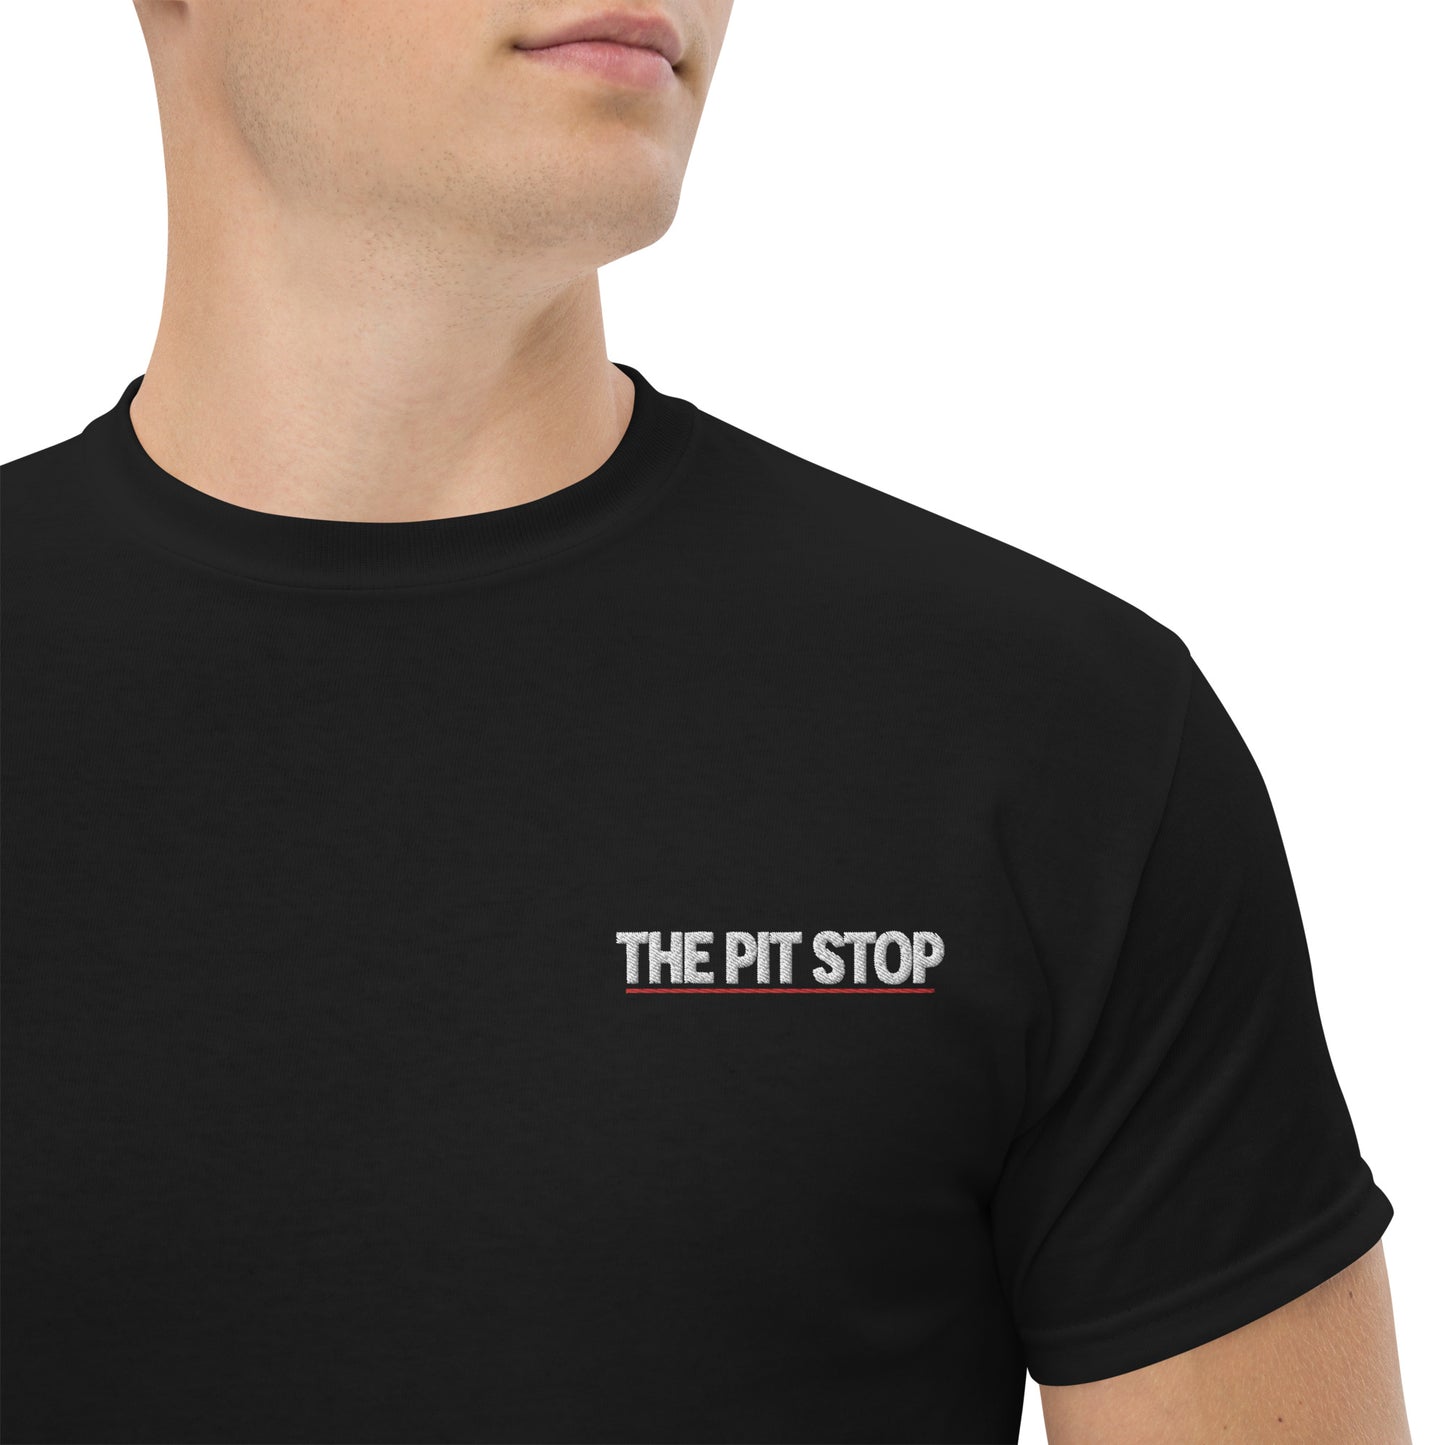 The Pit Stop T-Shirt